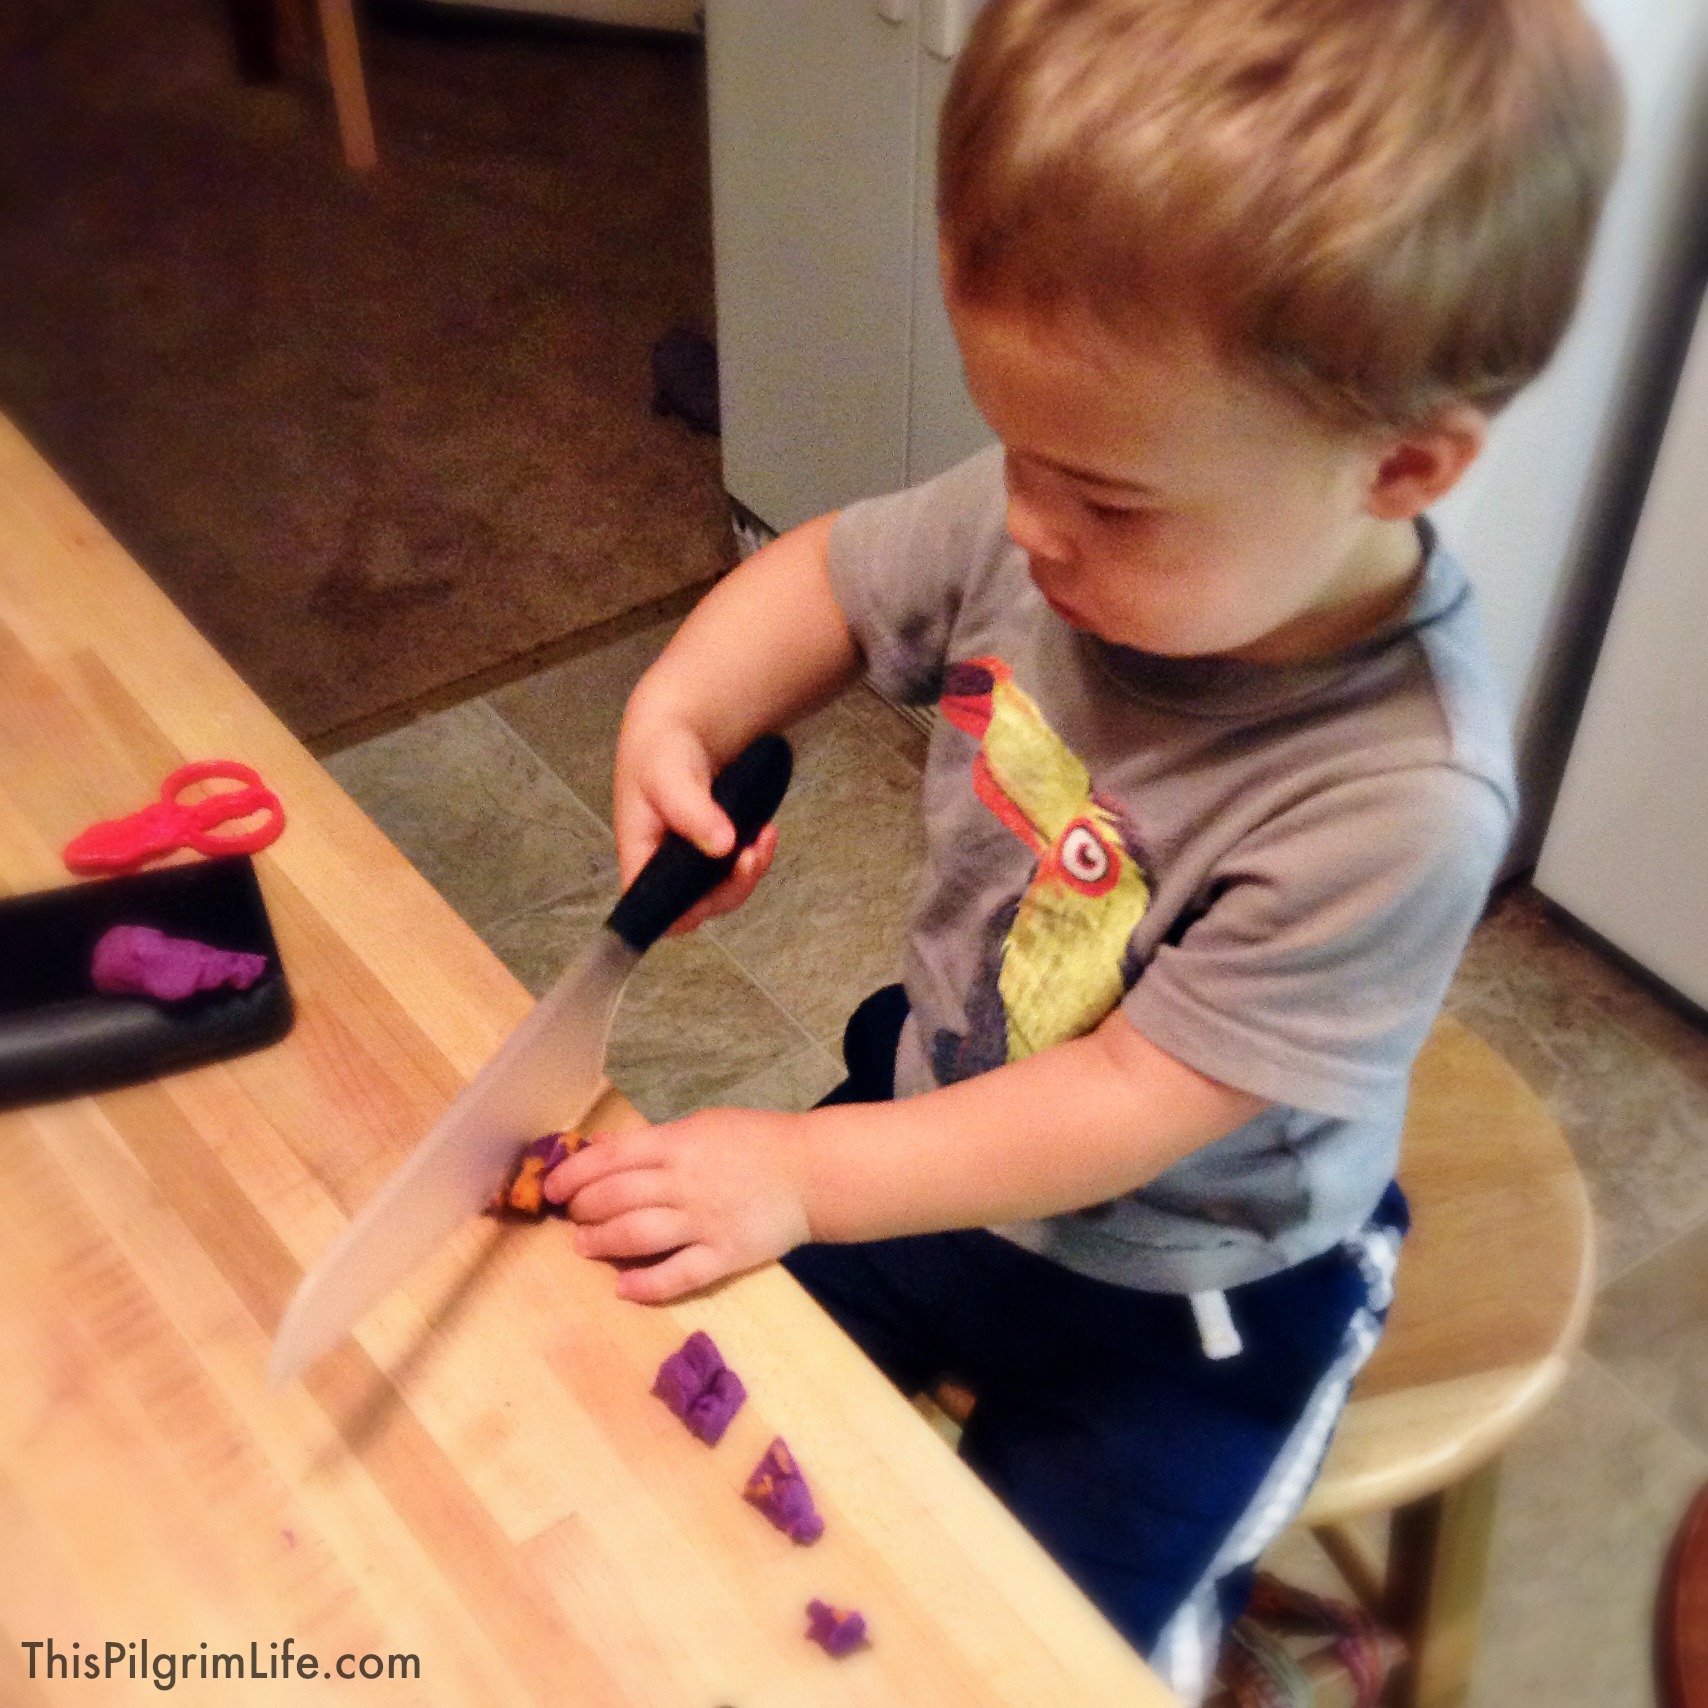 Even toddlers can safely participate in cutting food in the kitchen. Check out these tips for teaching knife skills to children of all ages. Plus, find ideas and links for age-appropriate cutting tools .